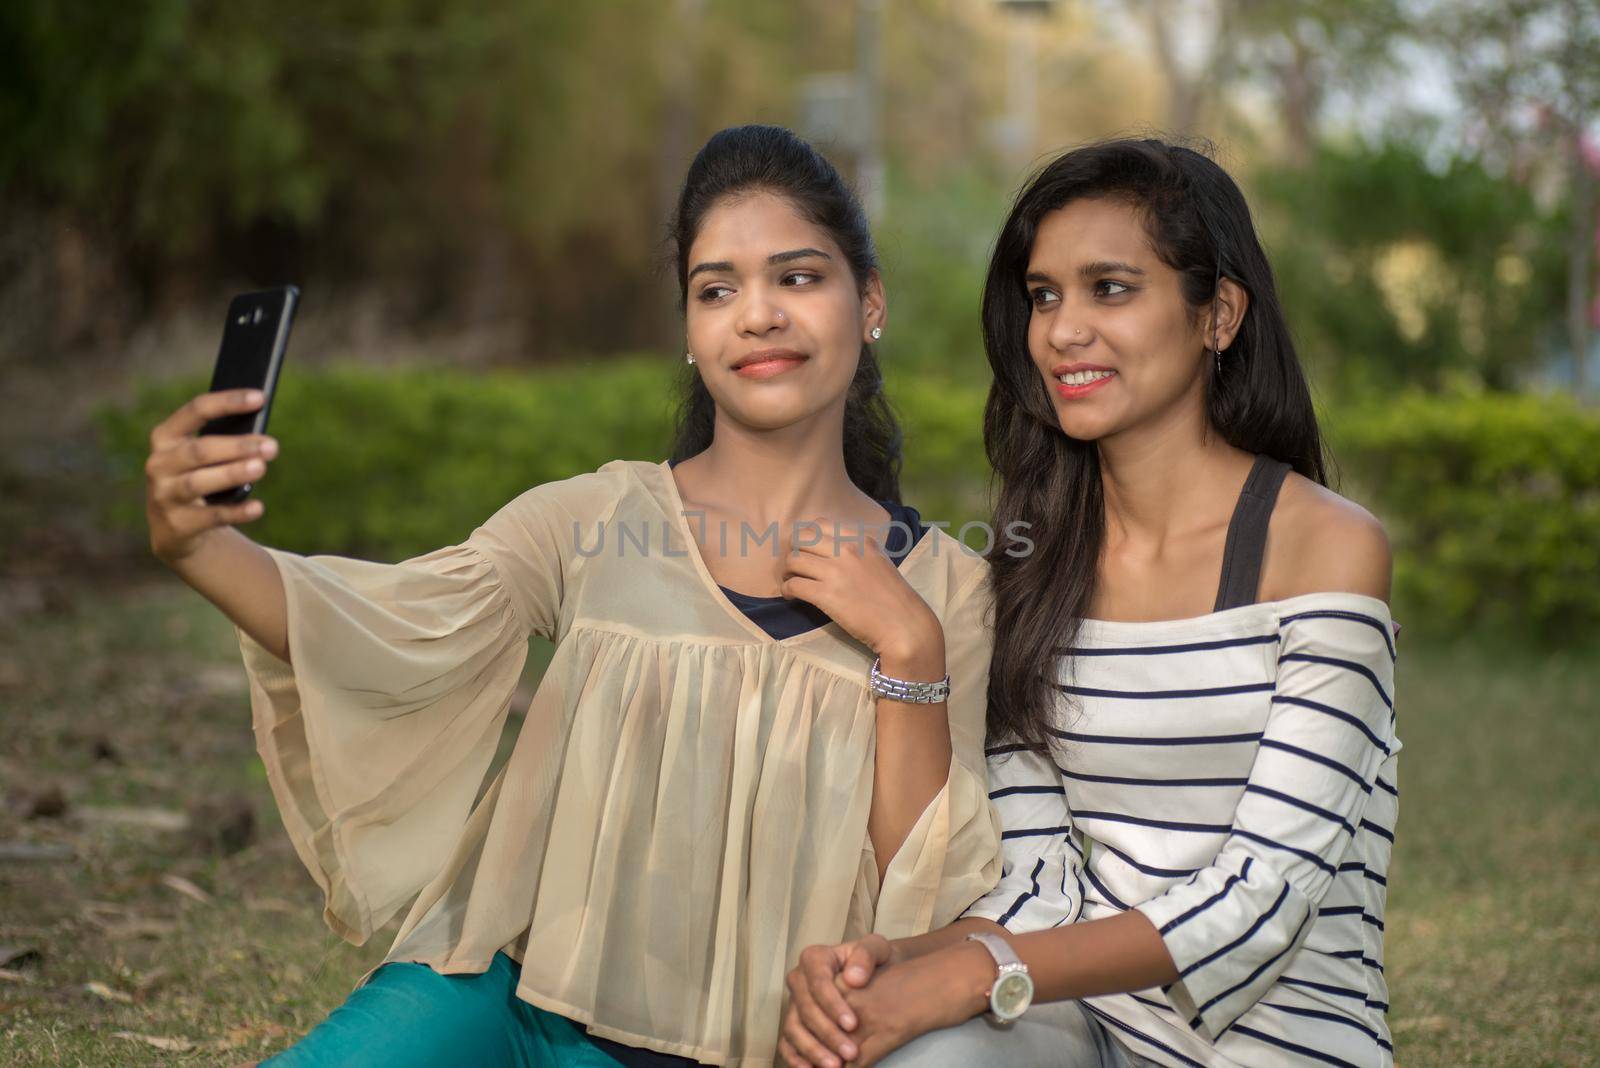 Two beautiful female friends taking selfie with smartphone in outdoors. by DipakShelare